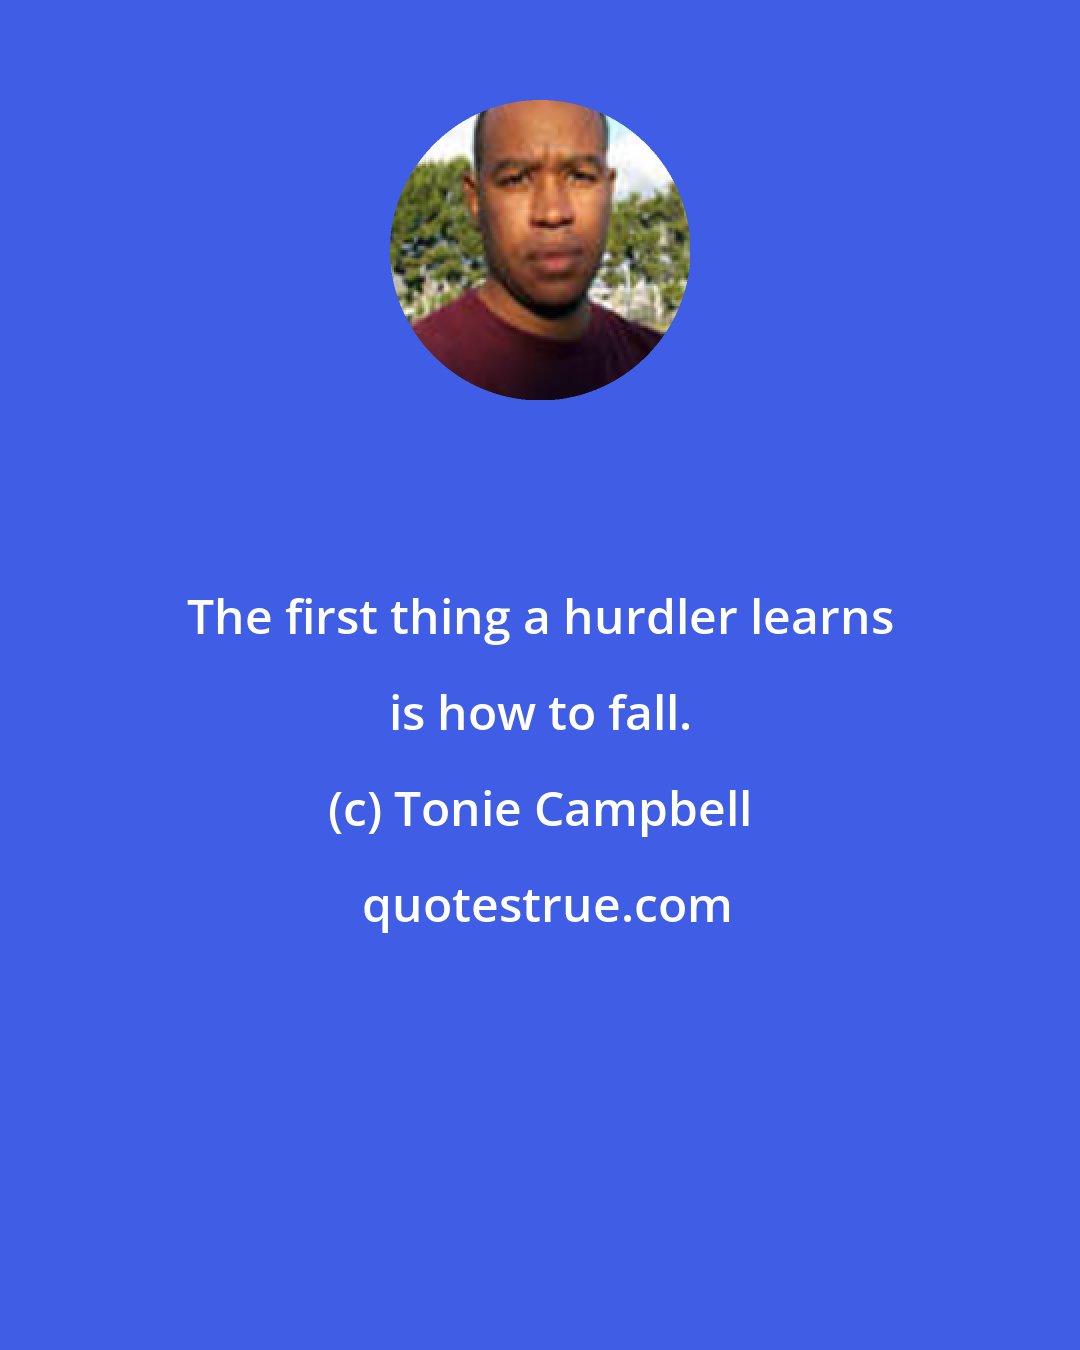 Tonie Campbell: The first thing a hurdler learns is how to fall.